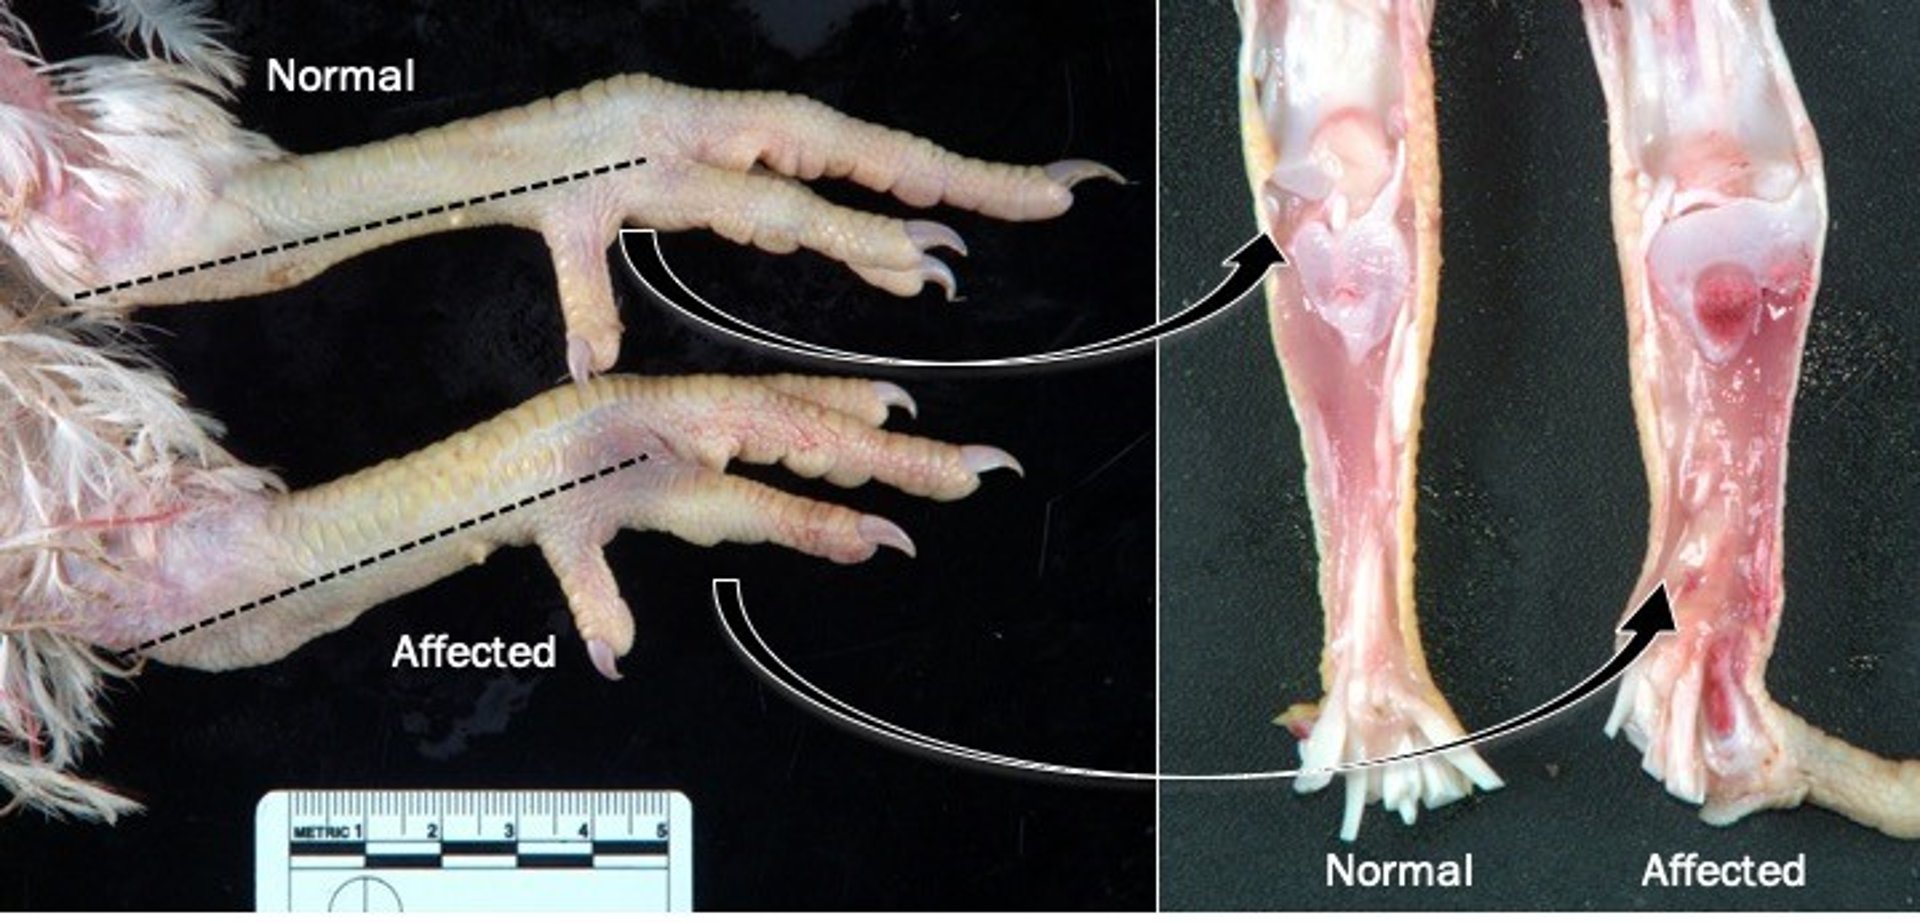 Normal vs affected tendons in poultry with viral arthritis